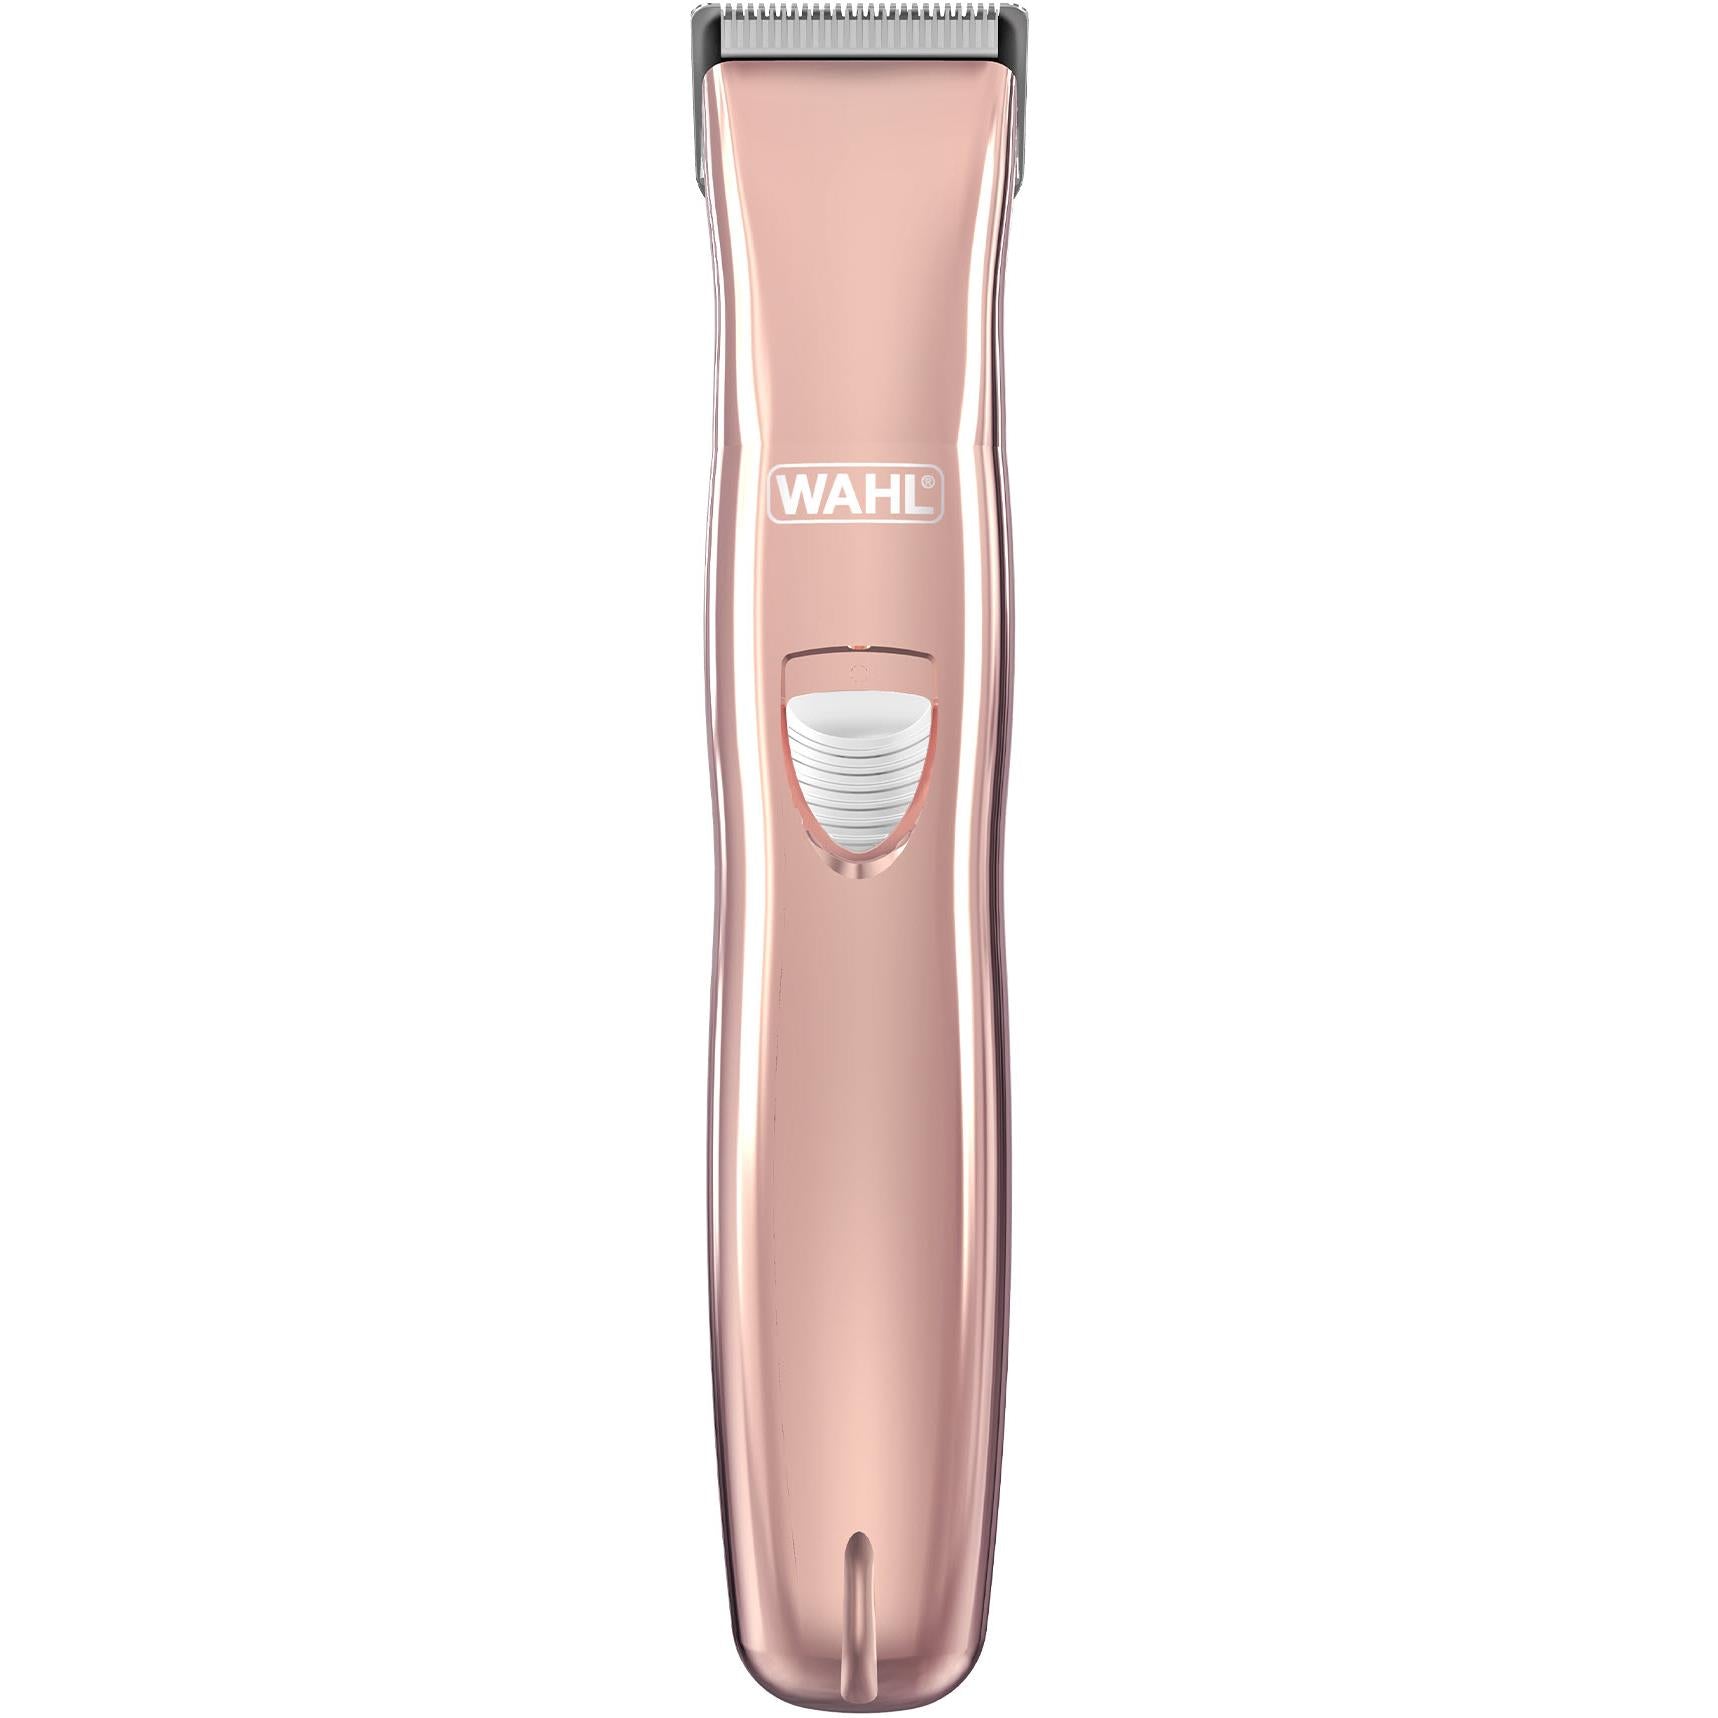 wahl face & body hair remover